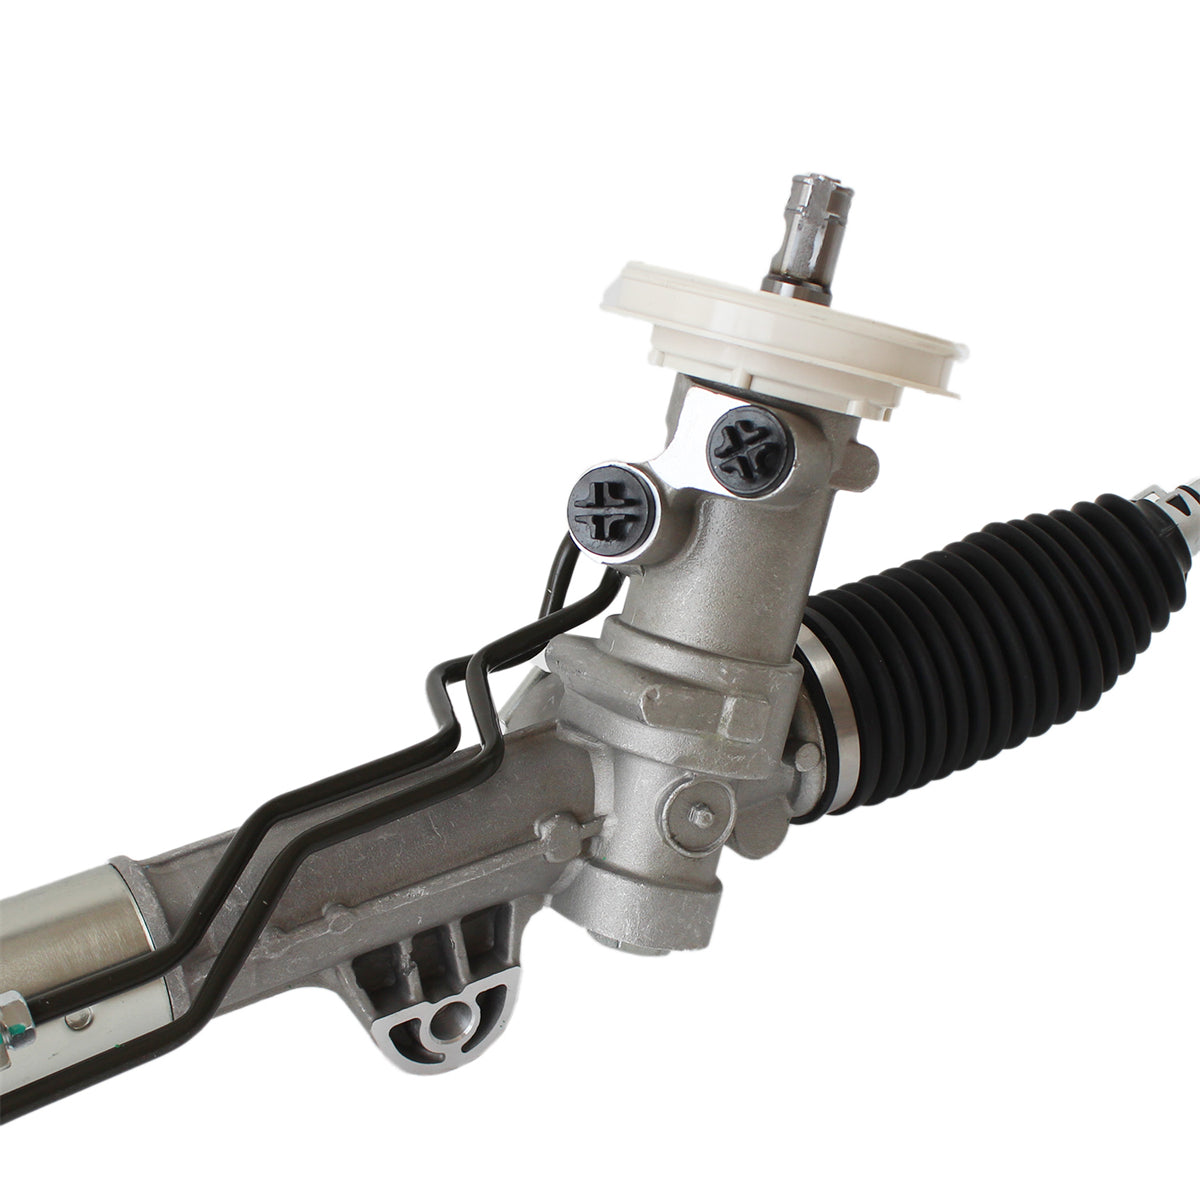 Daysyore® Power Steering Rack and Pinion for Chevy Impala Monte Carlo Buick Regal 22-186 26079913 26021769